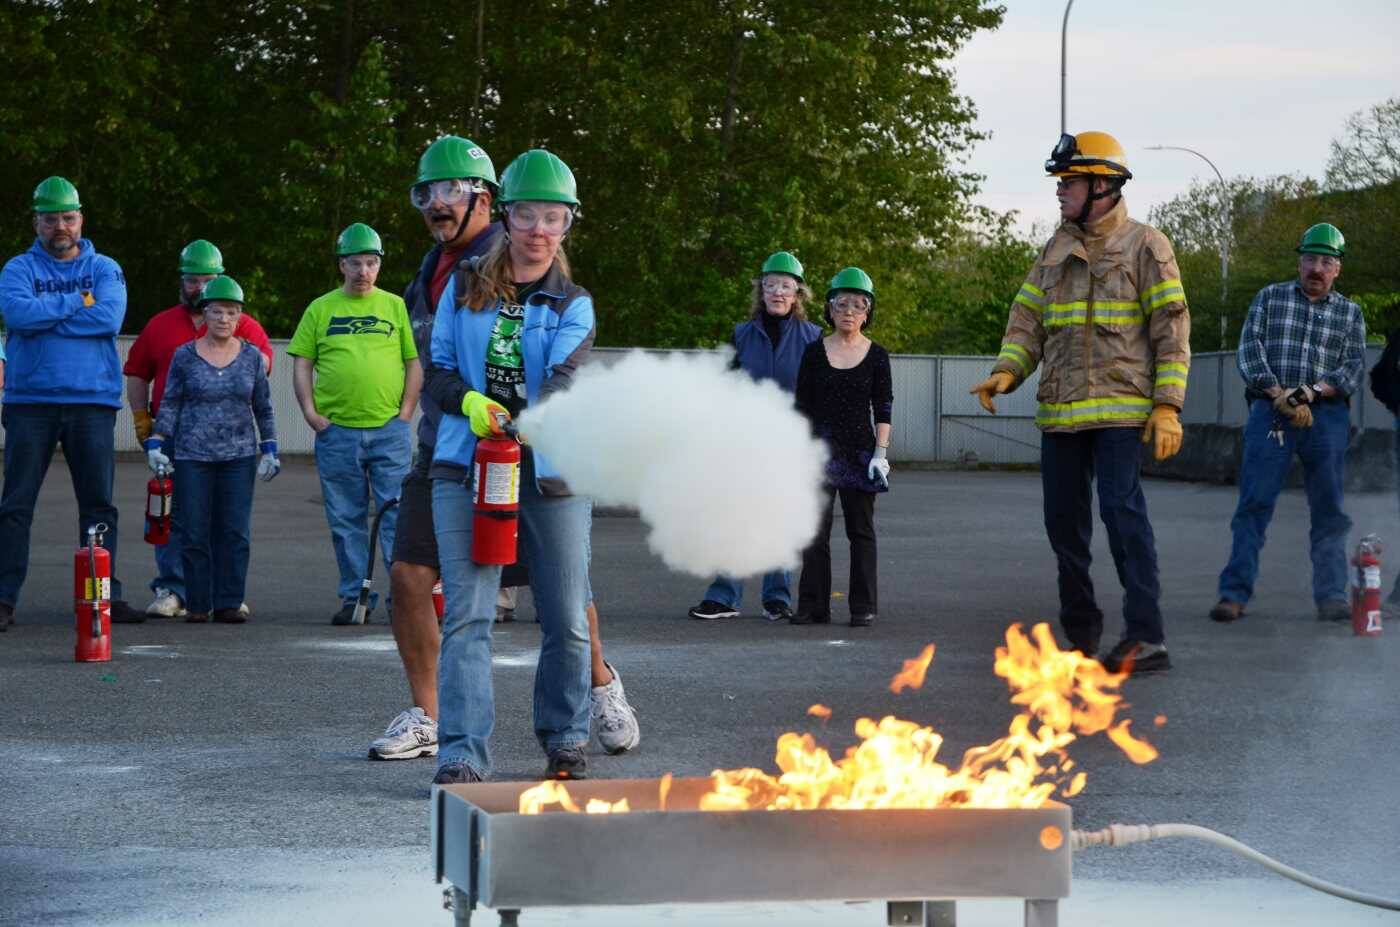 Photo courtesy of the City of Renton
Renton’s Emergency Preparedness Academy offers classes and courses, including fire suppression.